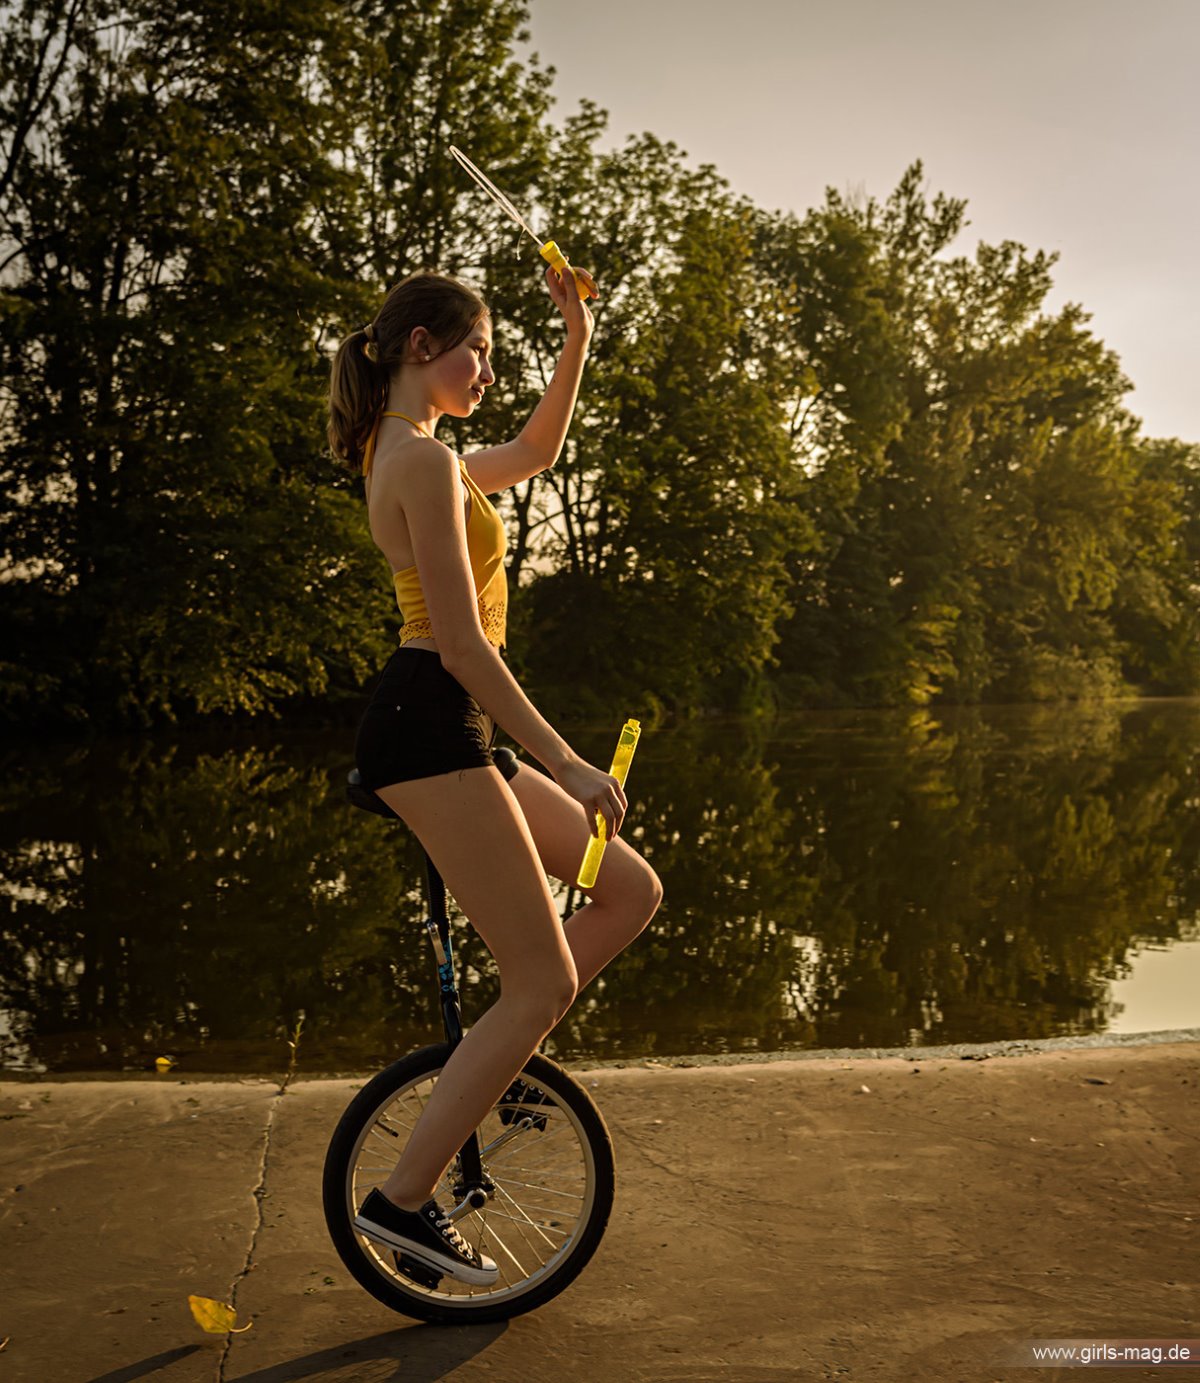 Girls Mag Annika Bubbles on a Unicycle 0122 8141205885.jpg